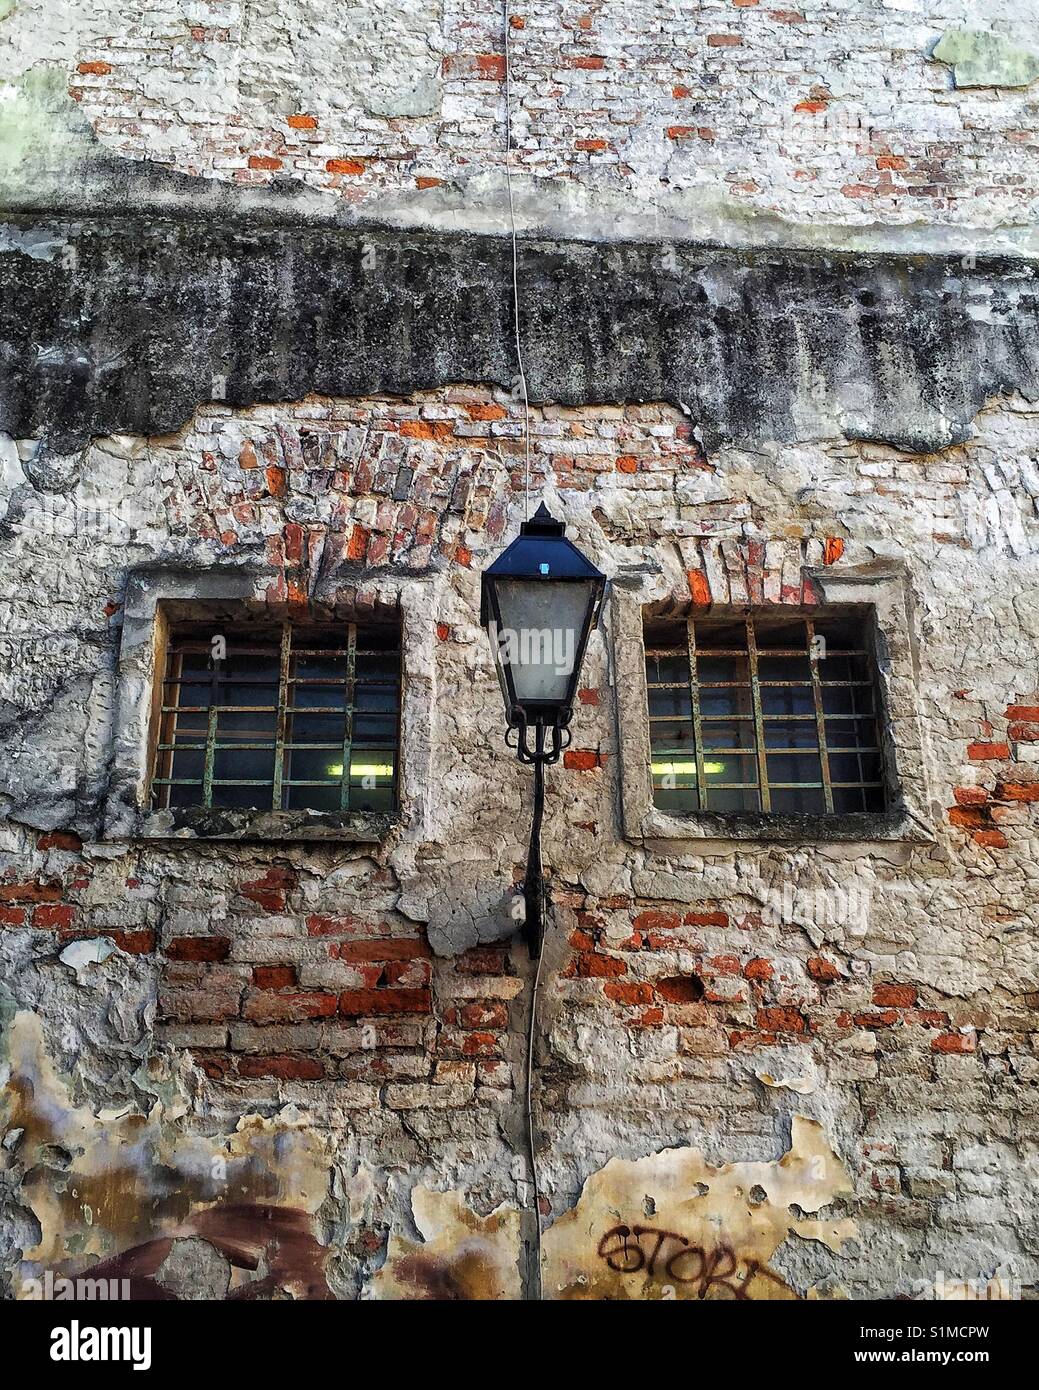 Brick wall of old derelict building with metal bars windows and street light out front. Croatia Stock Photo